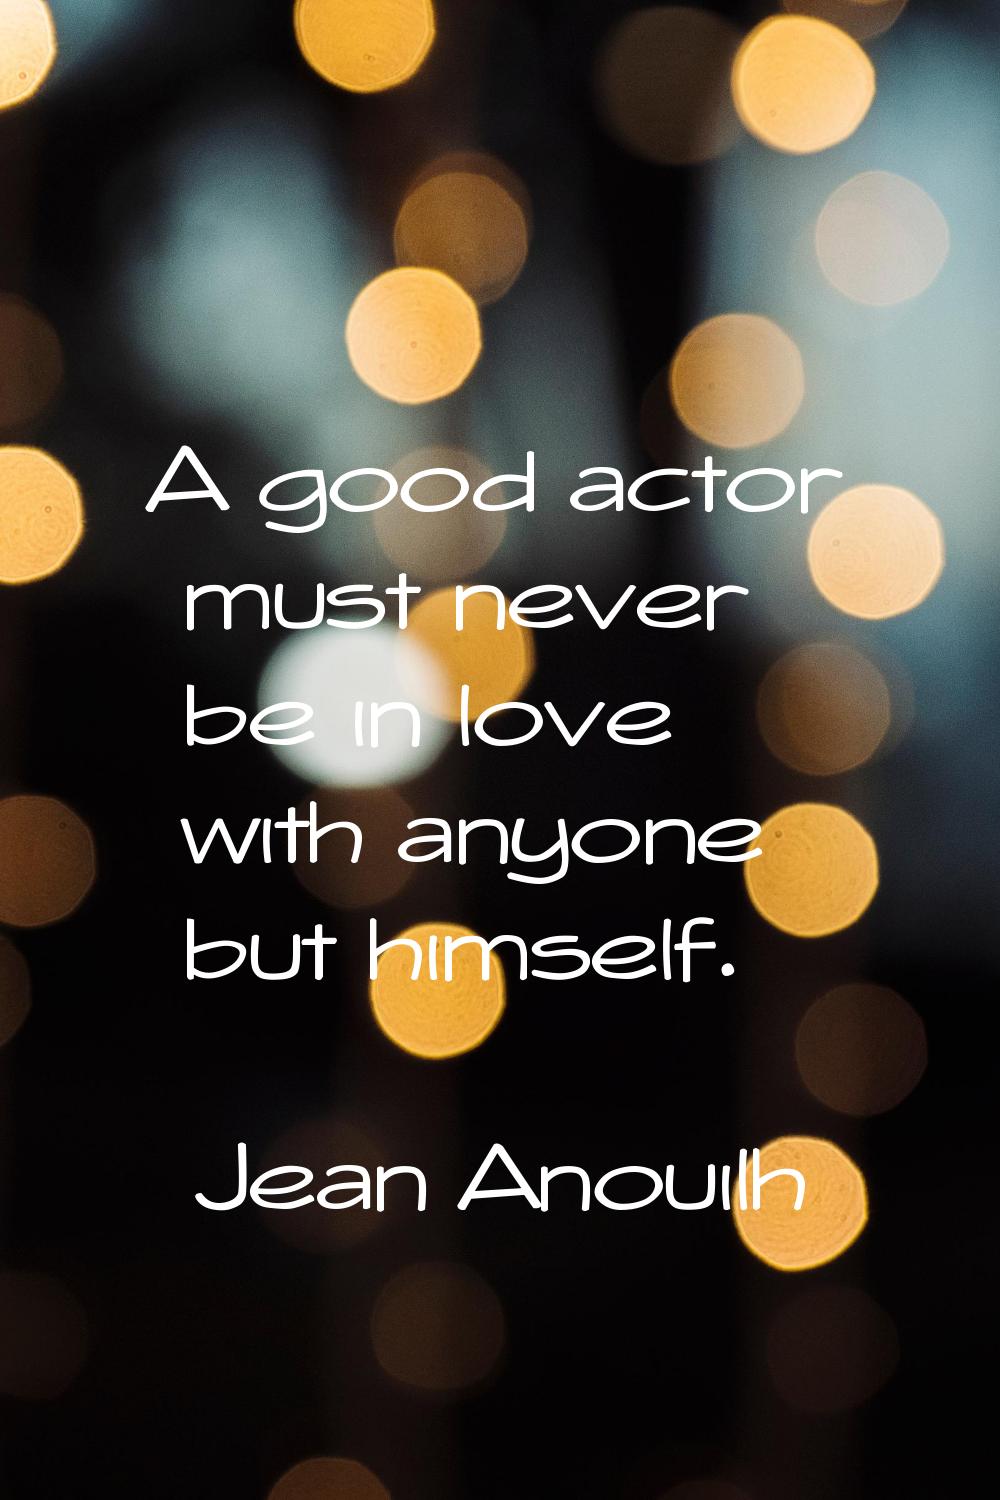 A good actor must never be in love with anyone but himself.